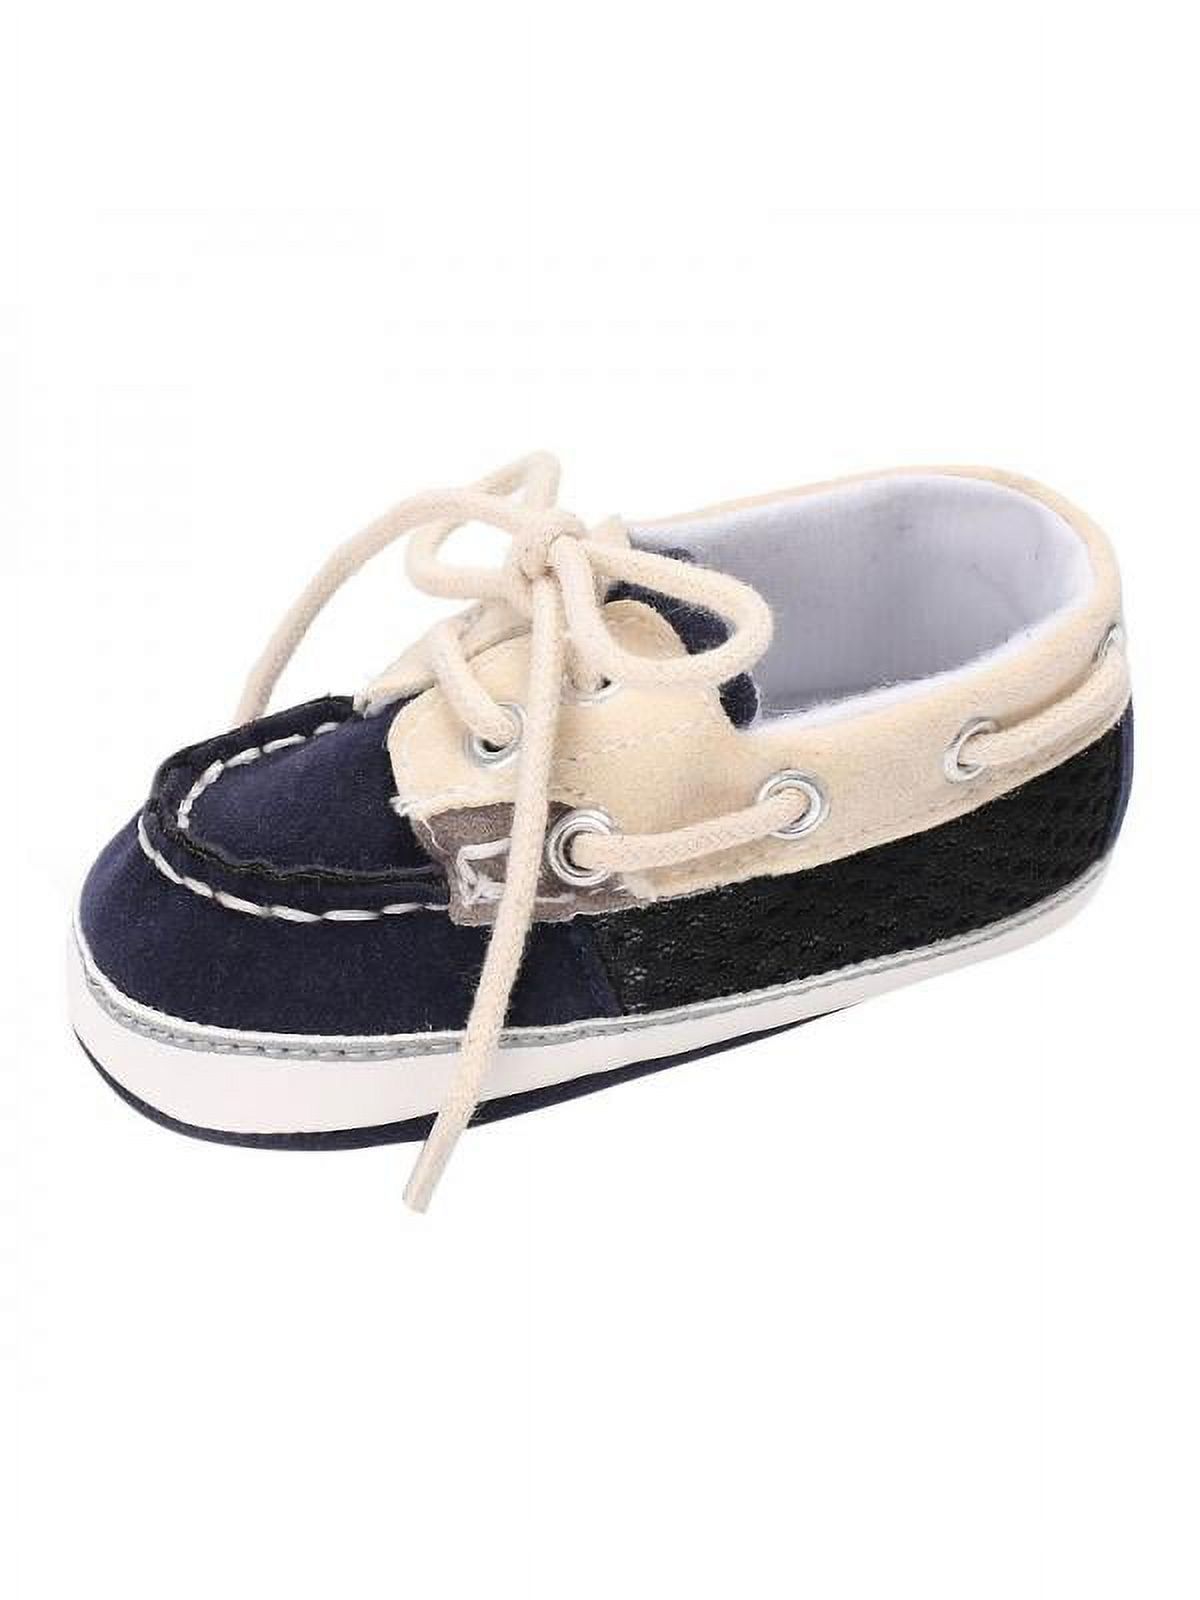 Baby Boy Casual Shoes Toddler Infant Sneaker Soft Sole Crib Shoes - image 5 of 11